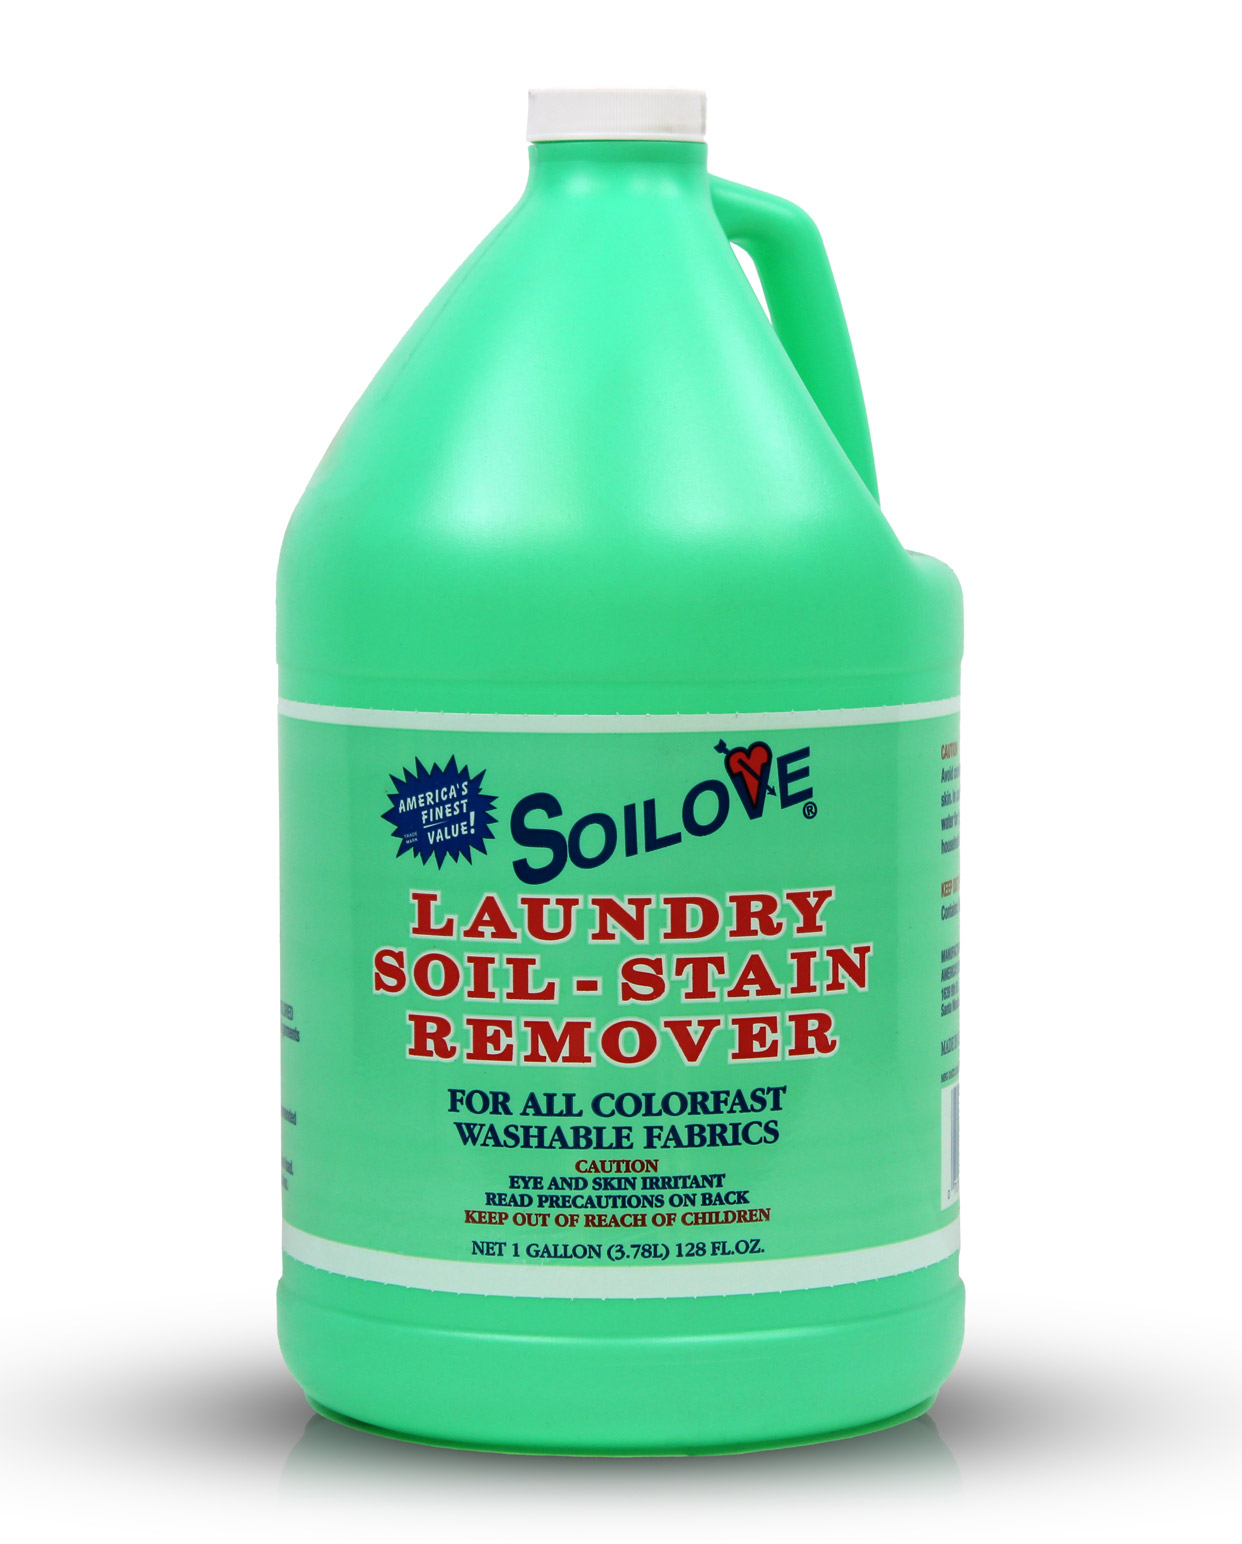 128oz bottle of Best Laundry Stain Remover with a clear label displaying the brand name.